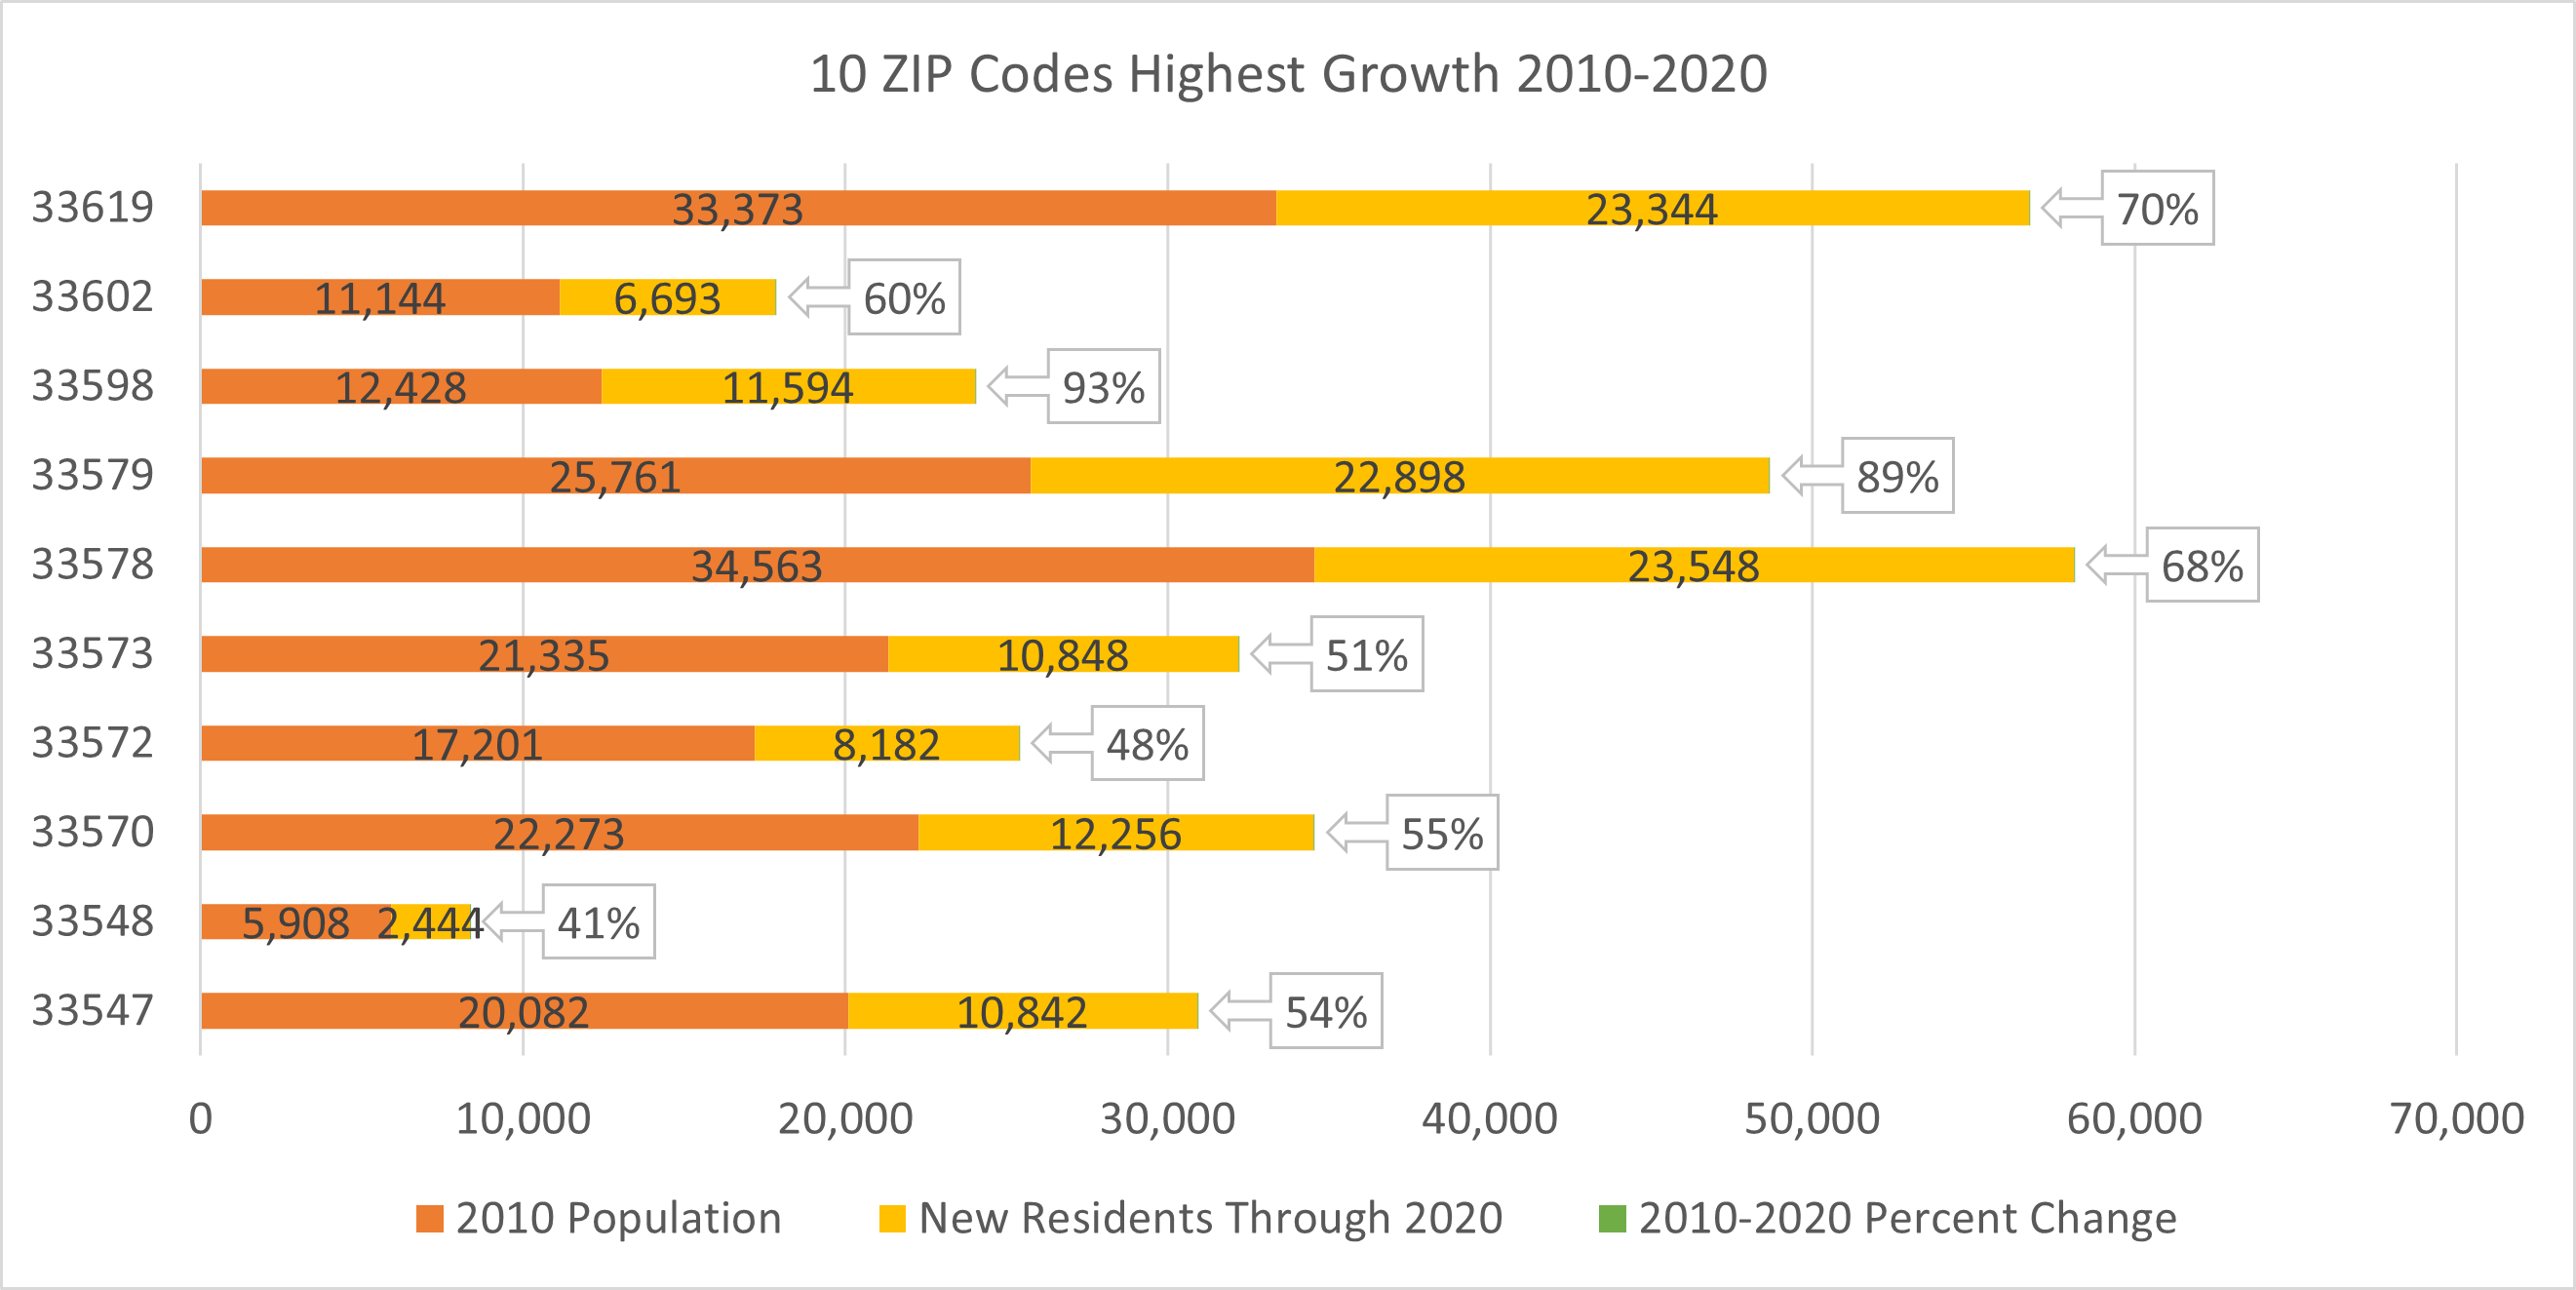 This horizontal stacked chart shows 2010 population for 10 ZIP Codes with highest growth since 2010. It also shows the new population that moved to each ZIP Code from 2010 to 2020. On average, these ZIP Codes received 12,059 new residents and grew 64%. ZIP Code 33548 saw the lowest number of new residents (2,444 persons). Its 2020 population is 41% higher than 2010. ZIP Code 33578 saw the highest number of new residents (23,548 persons). Its 2020 population is 68% higher than 2010.